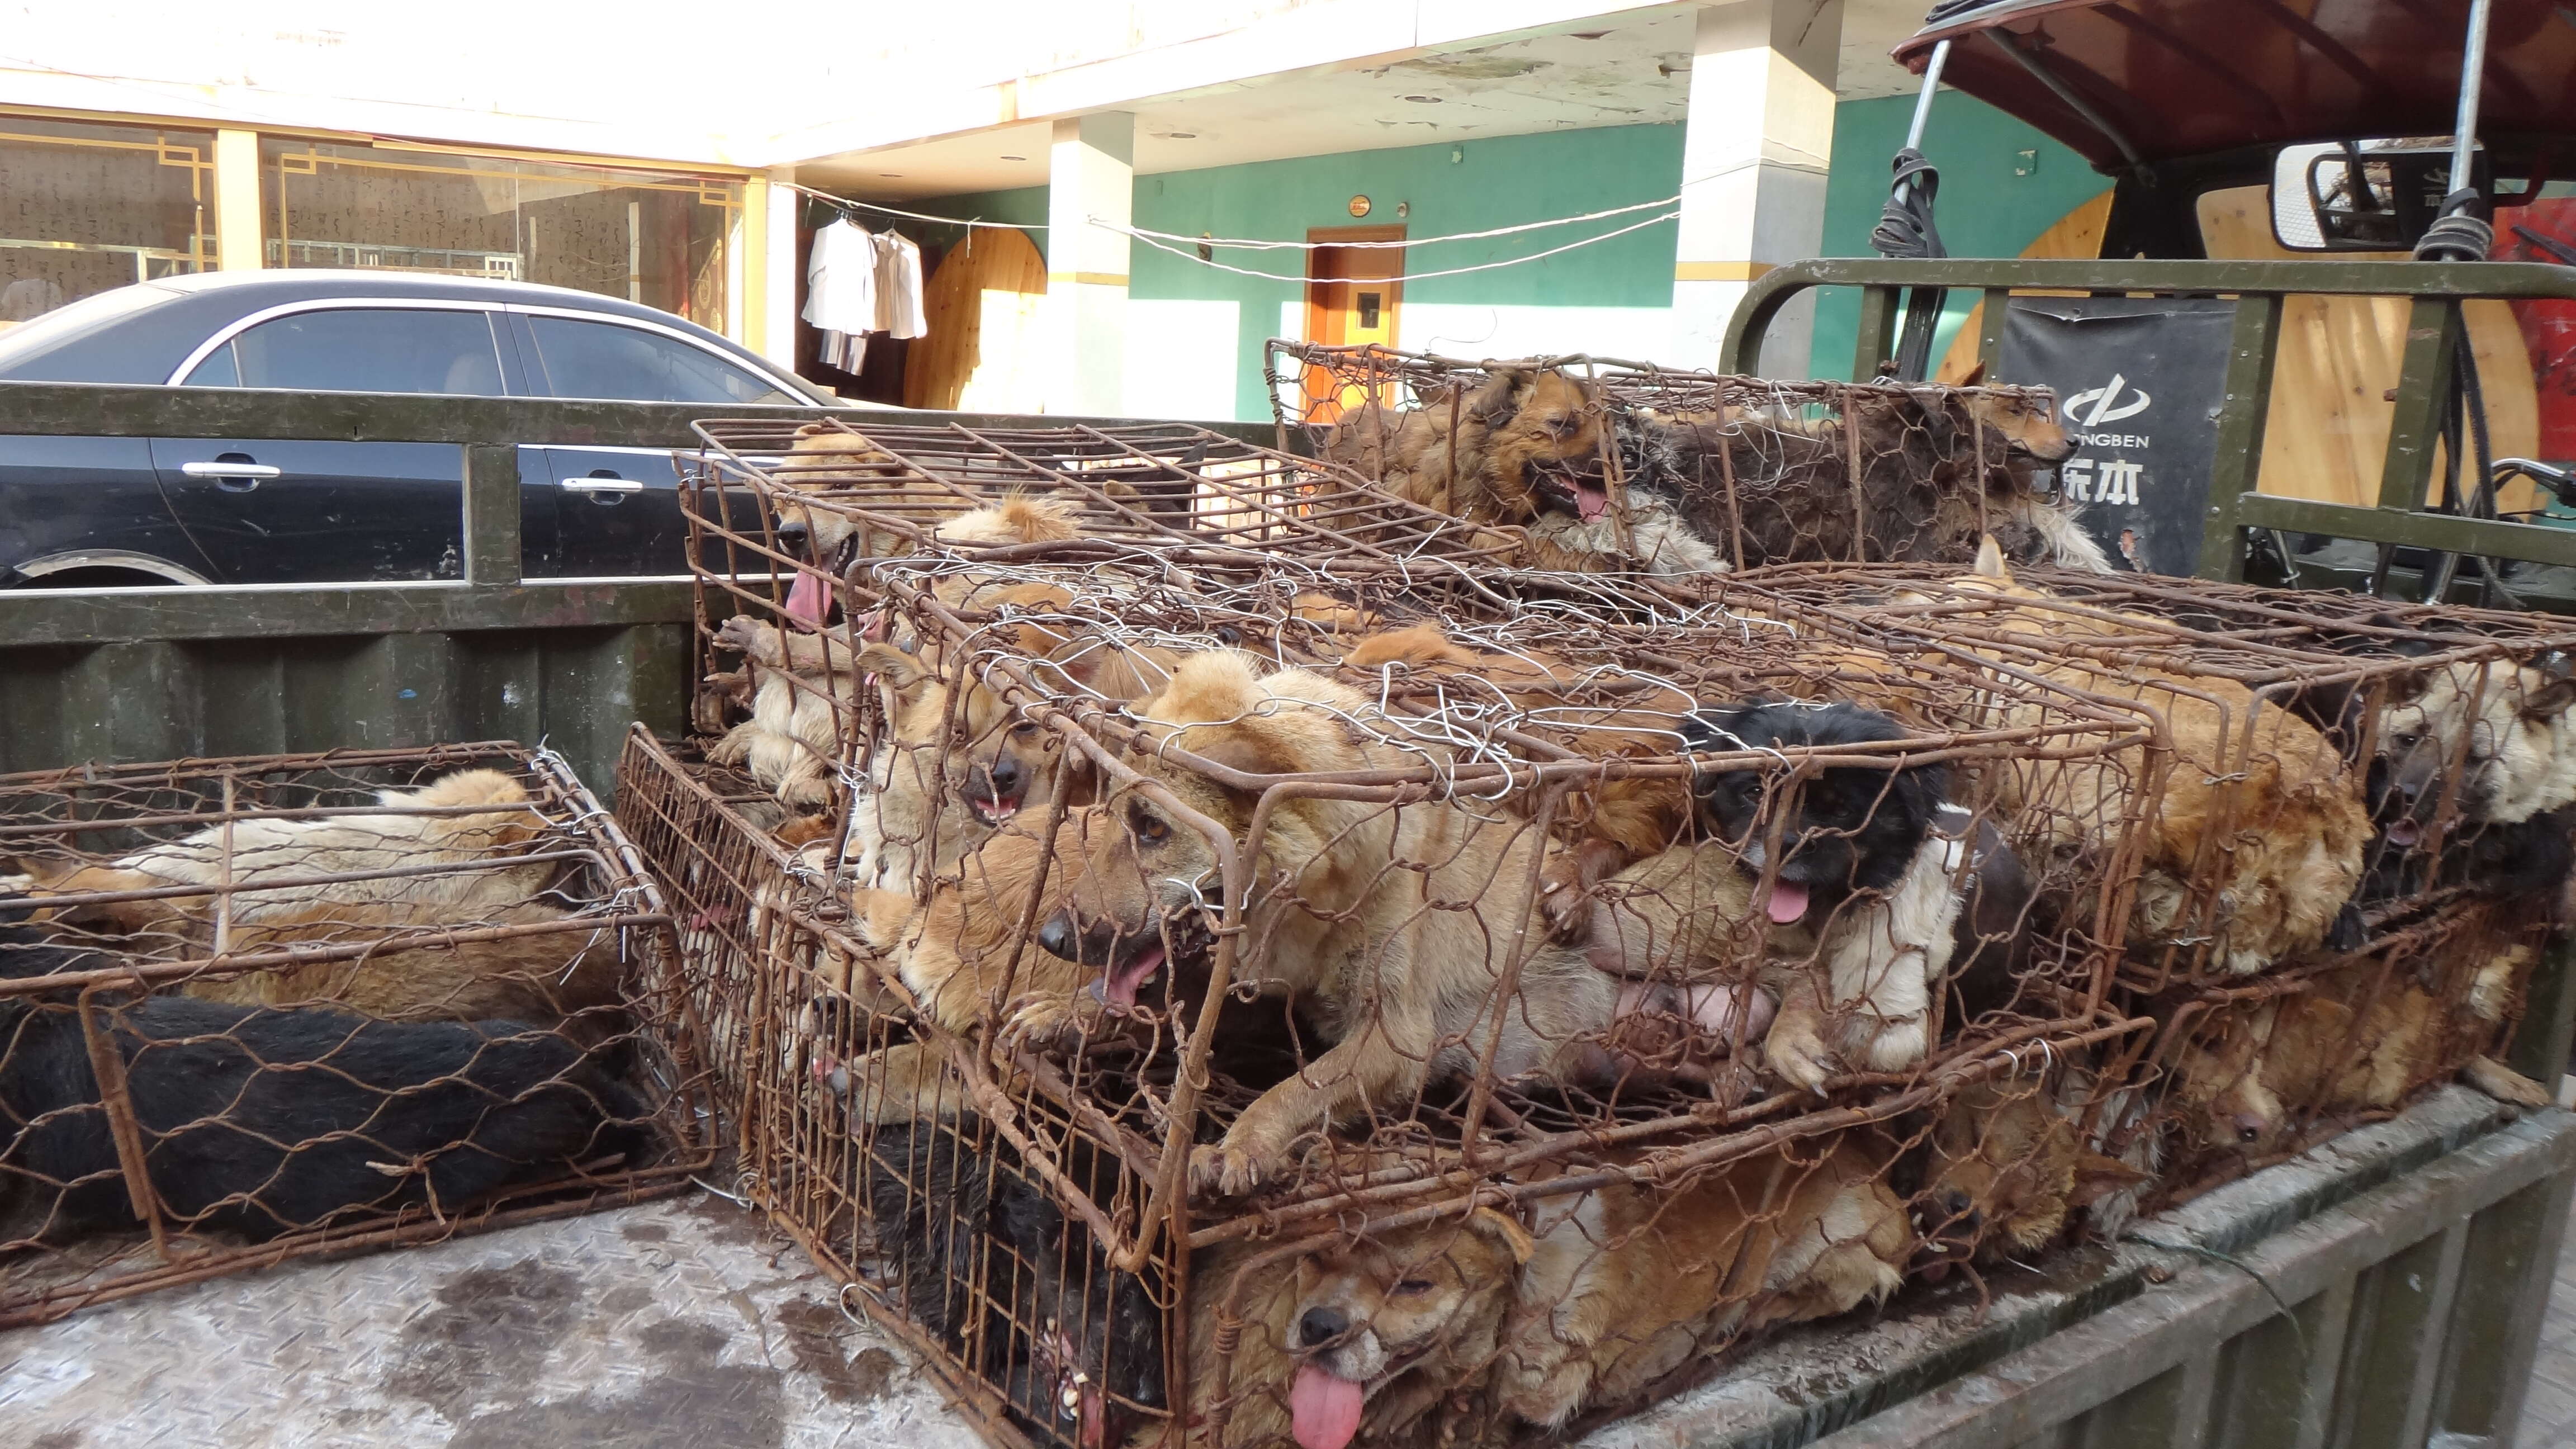 Dogs in cages at the Yulin Festival